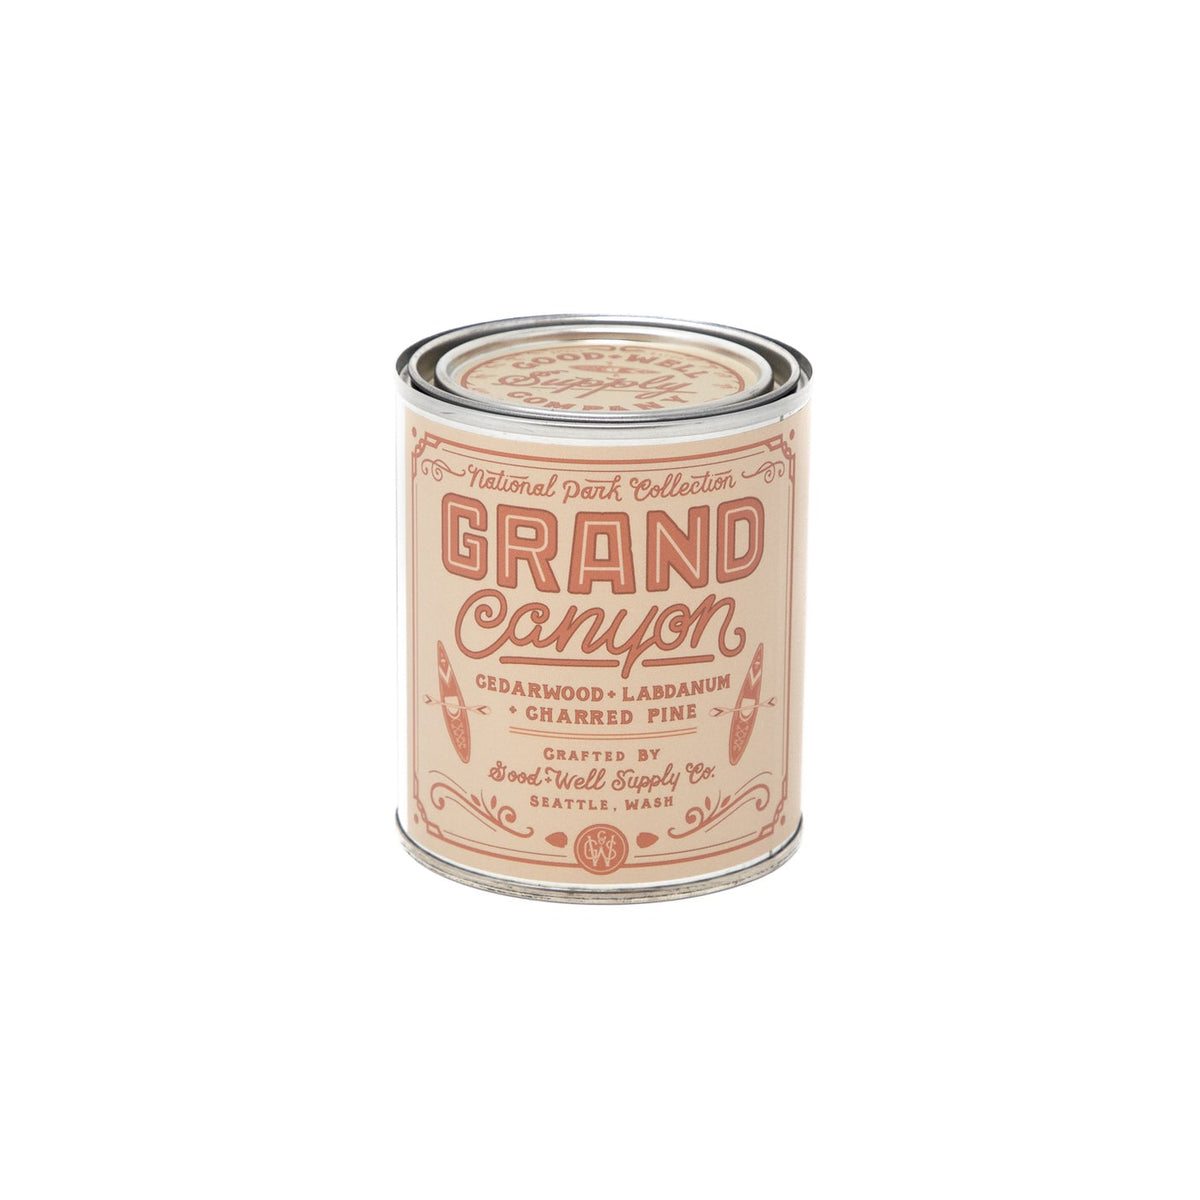 Good & Well Supply Co Grand Canyon National Park Candle 8oz